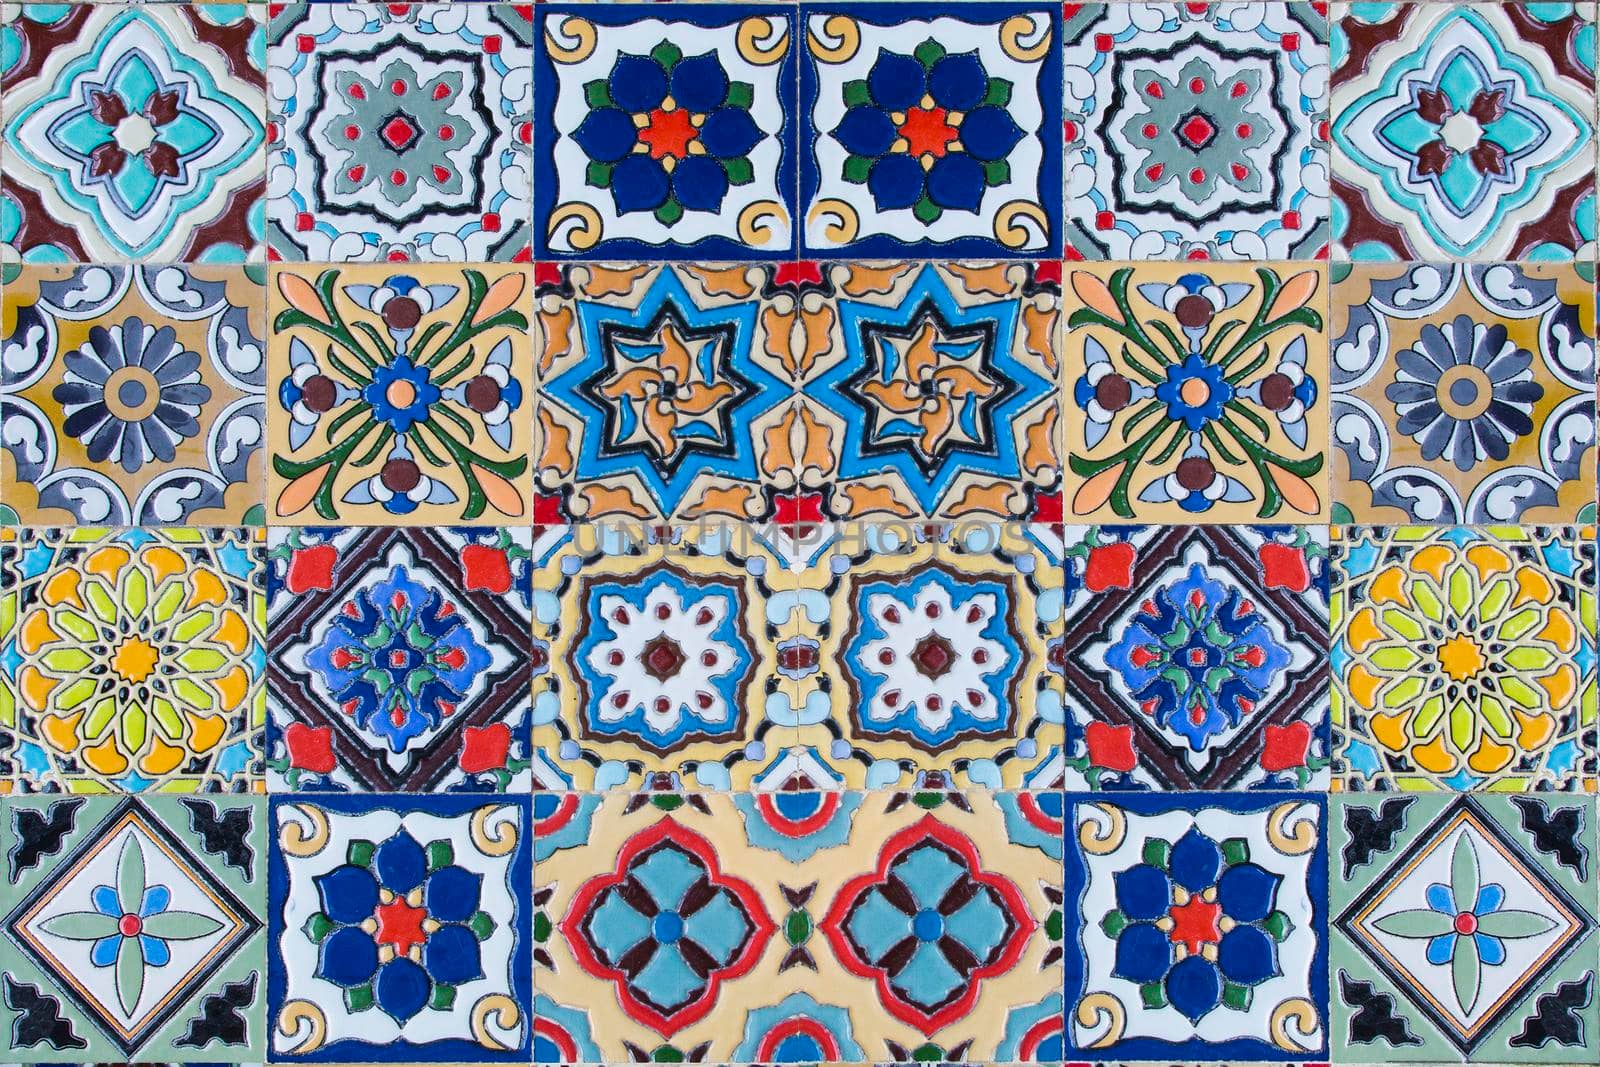 Ceramic tiles from Portugal by titipong